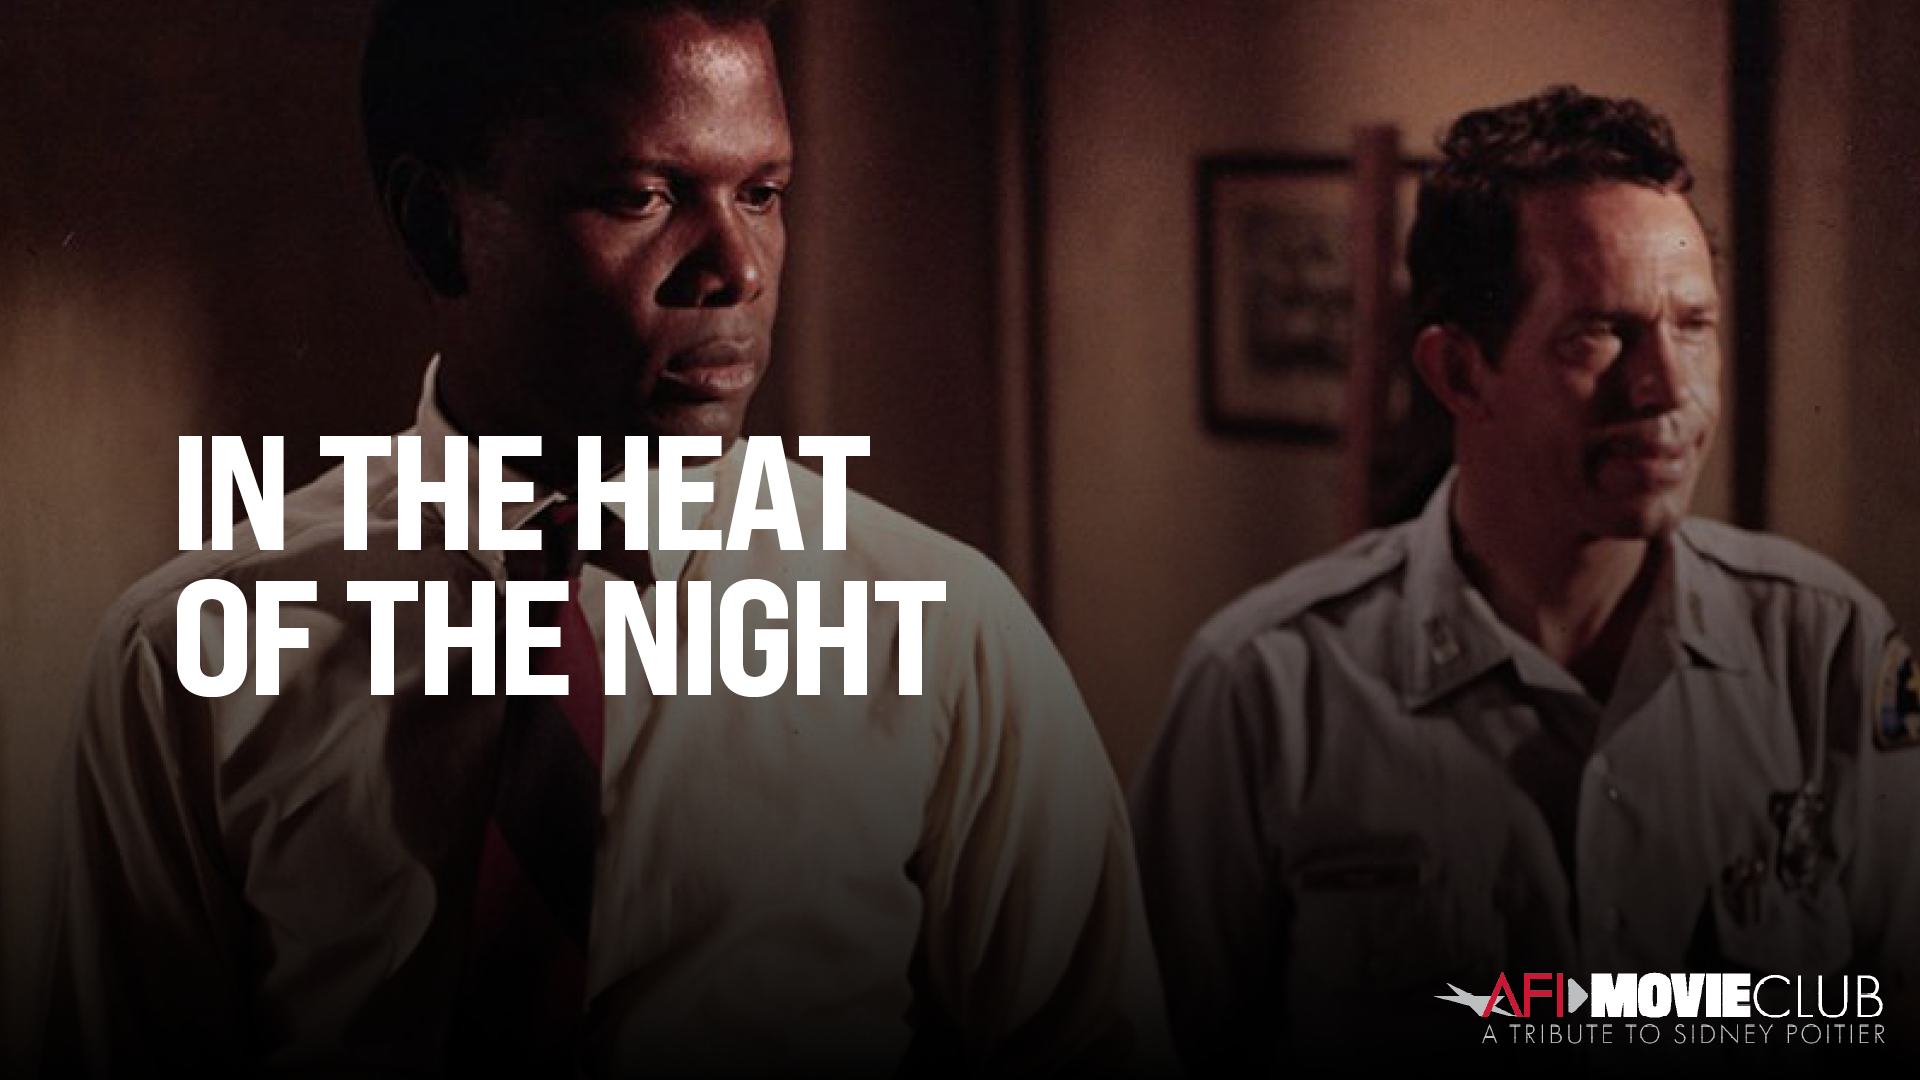 In the Heat of the Night Film Still - Sidney Poitier and Warren Oates